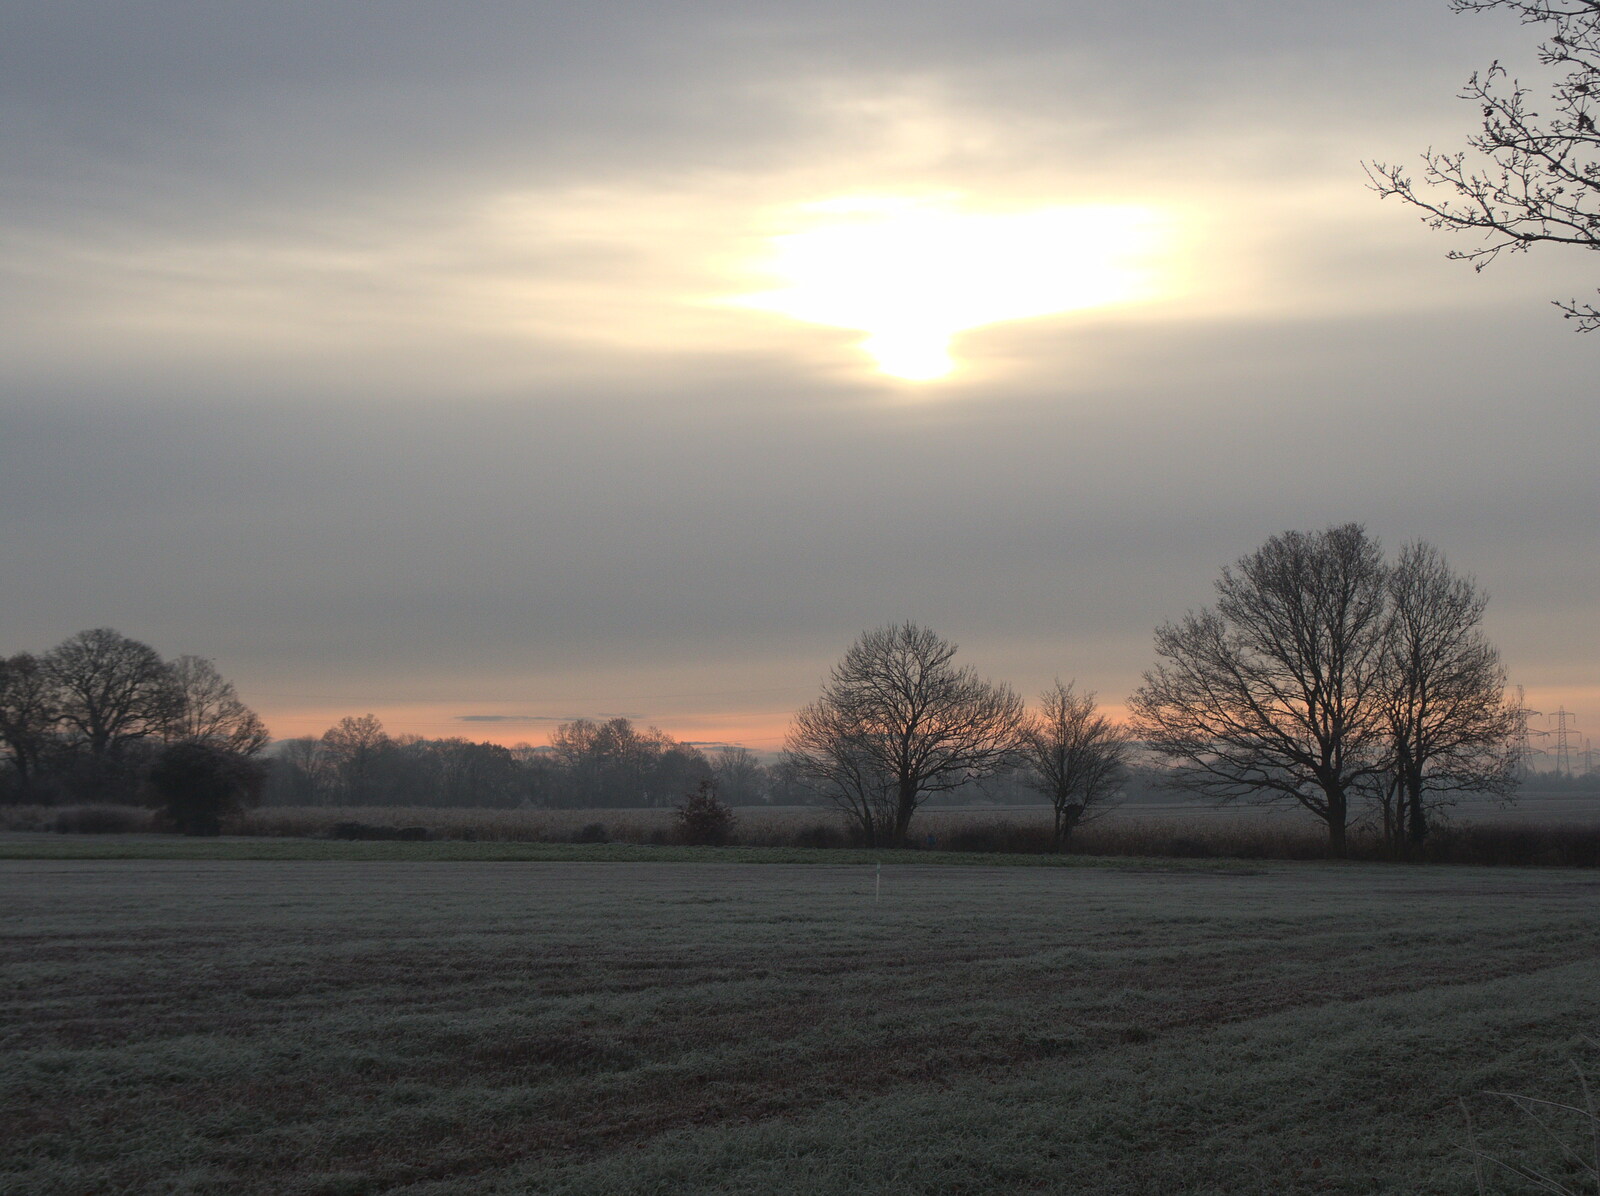 A frosty morning over the fields of Thrandeston from A Shopping Trip to Bury St. Edmunds, Suffolk - 14th December 2022